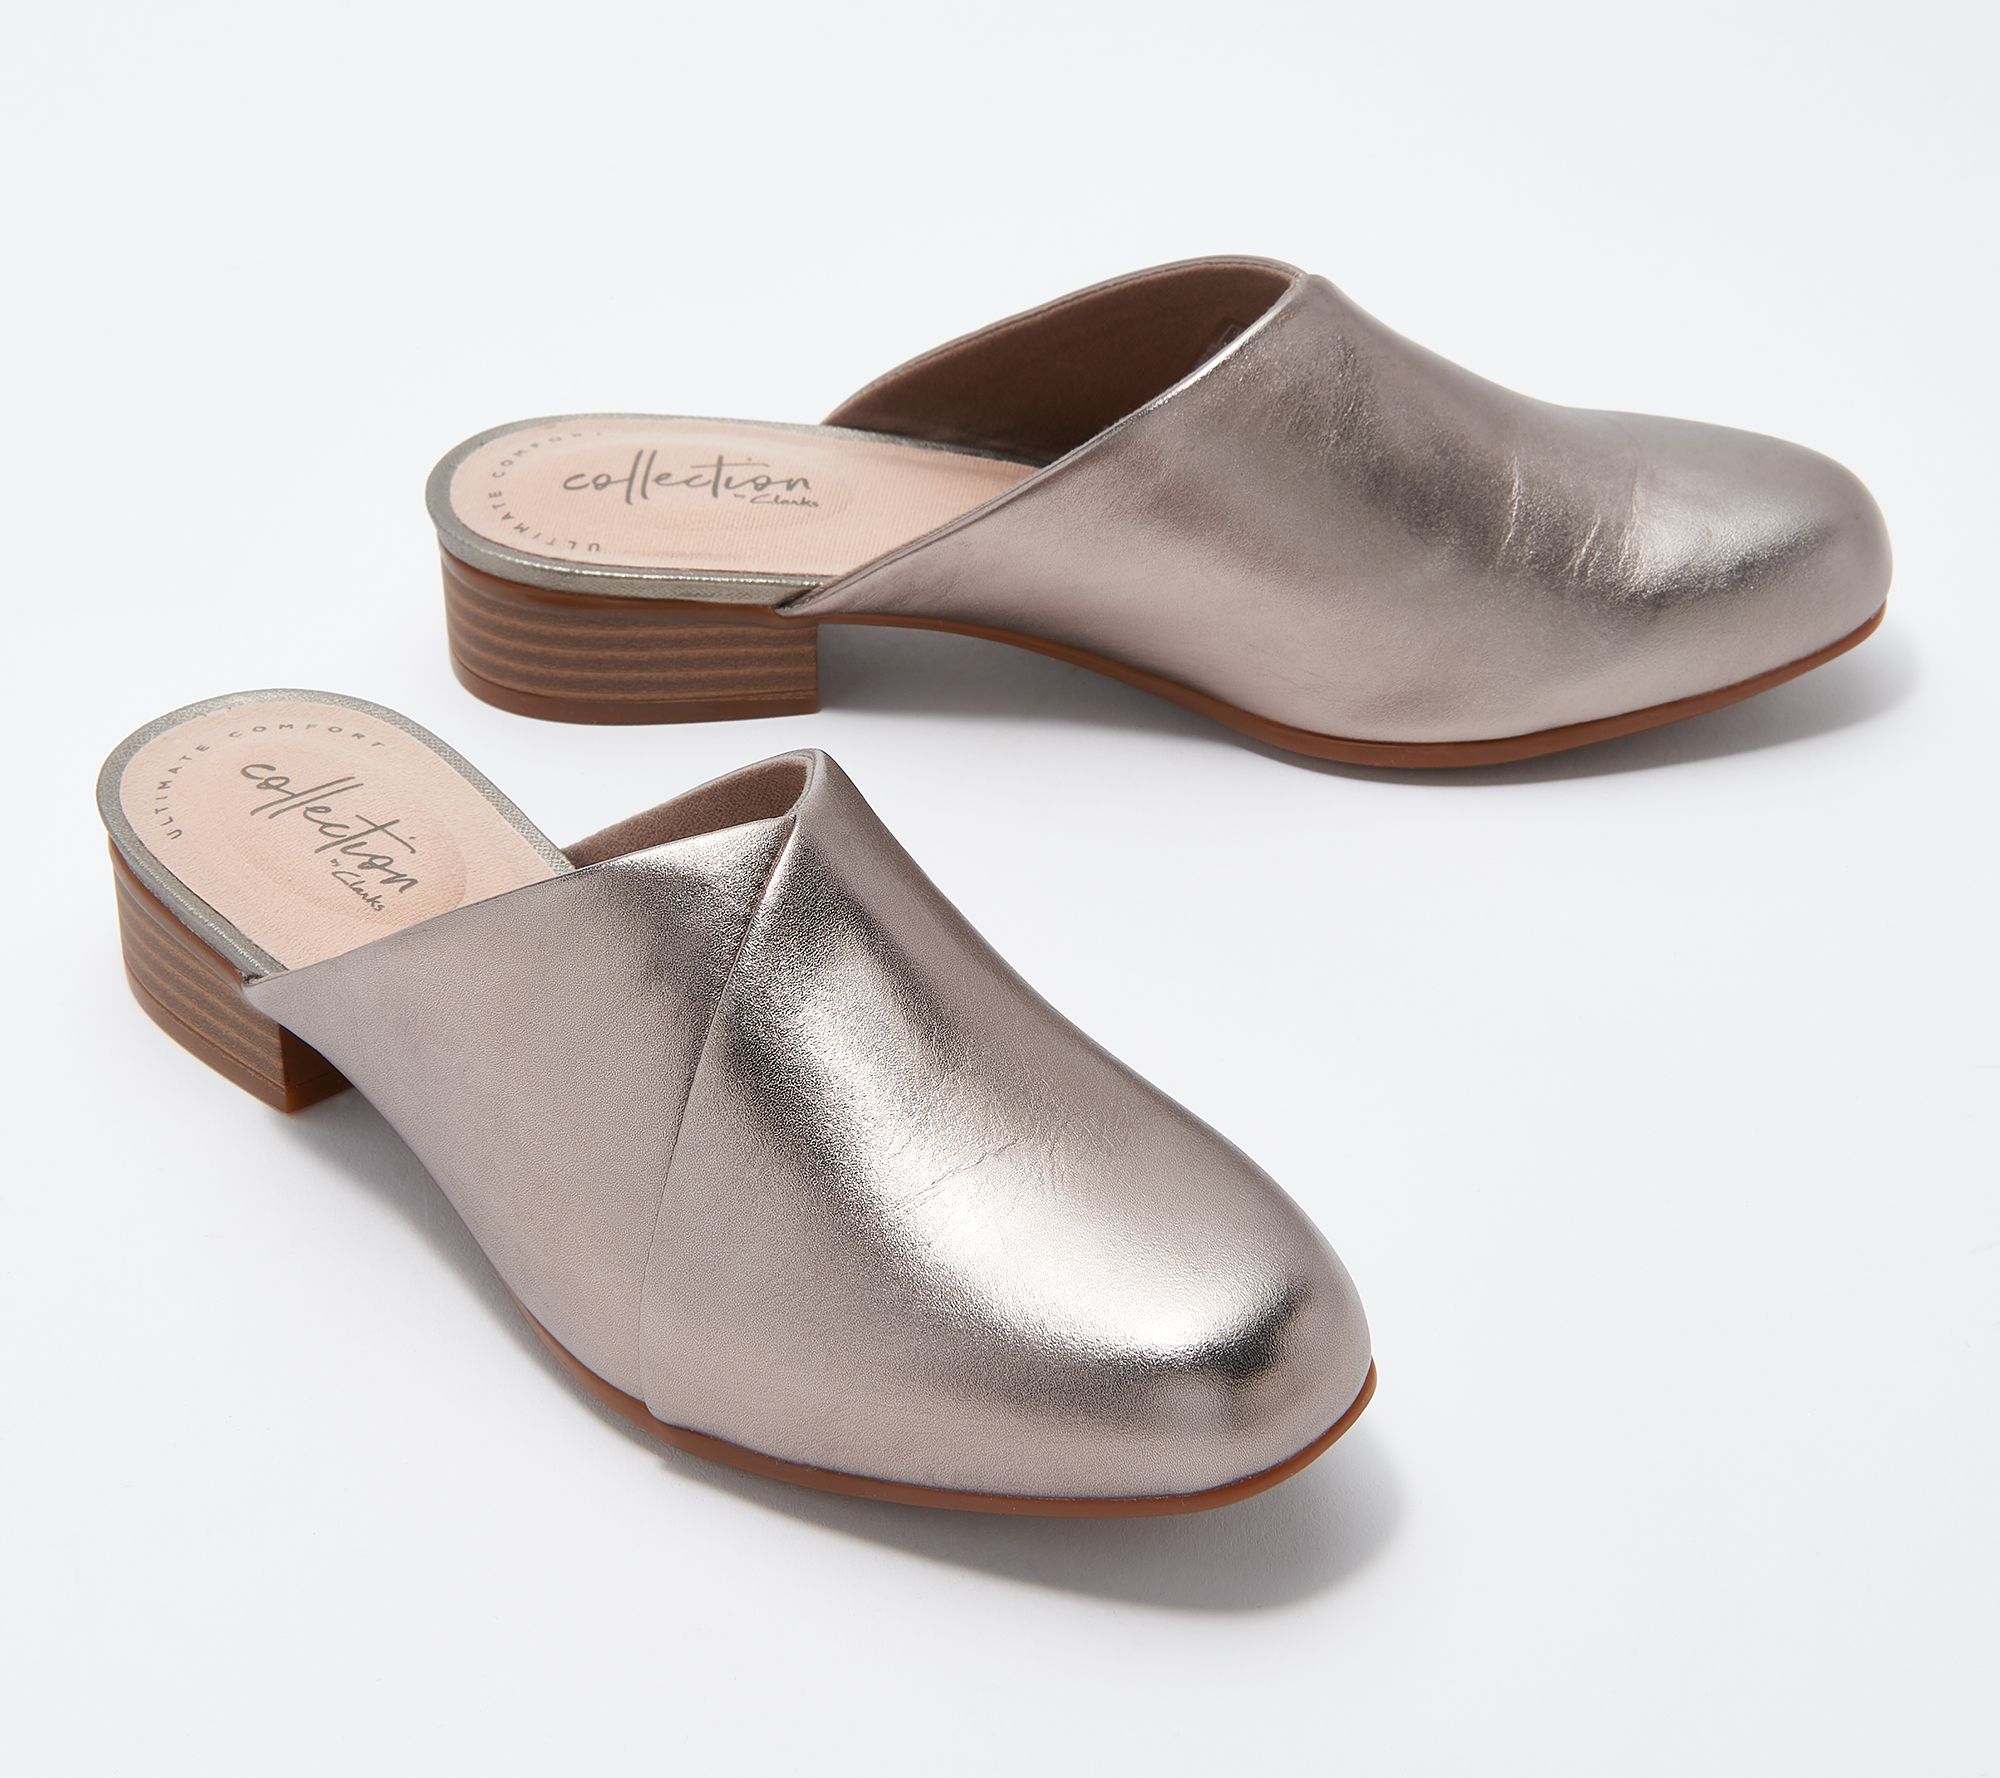 clarks mules clearance